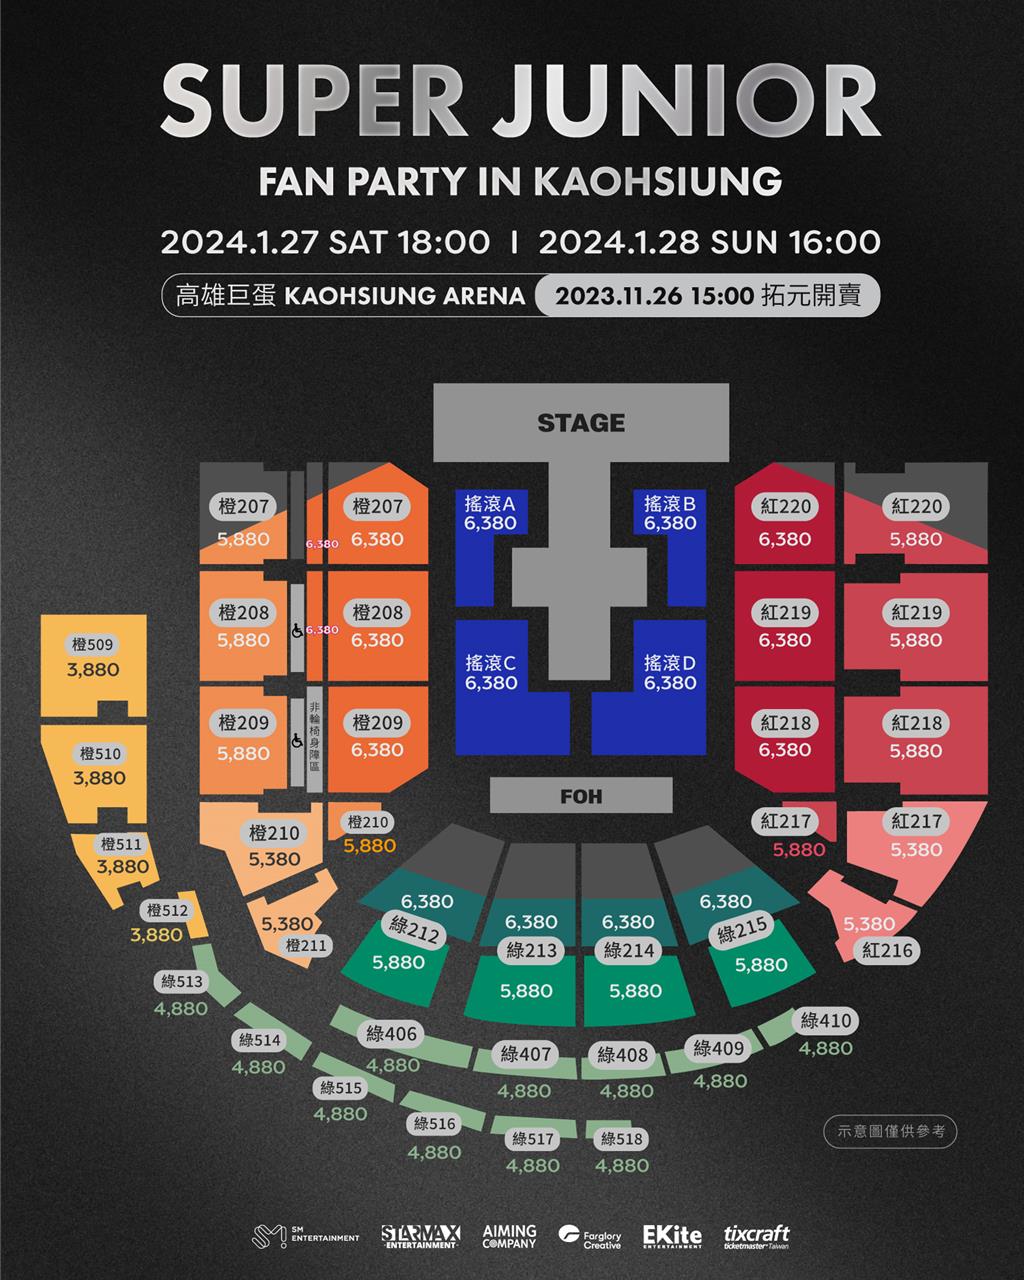 「SUPER JUNIOR FAN PARTY IN KAOHSIUNG」售票圖。（遠雄創藝提供）